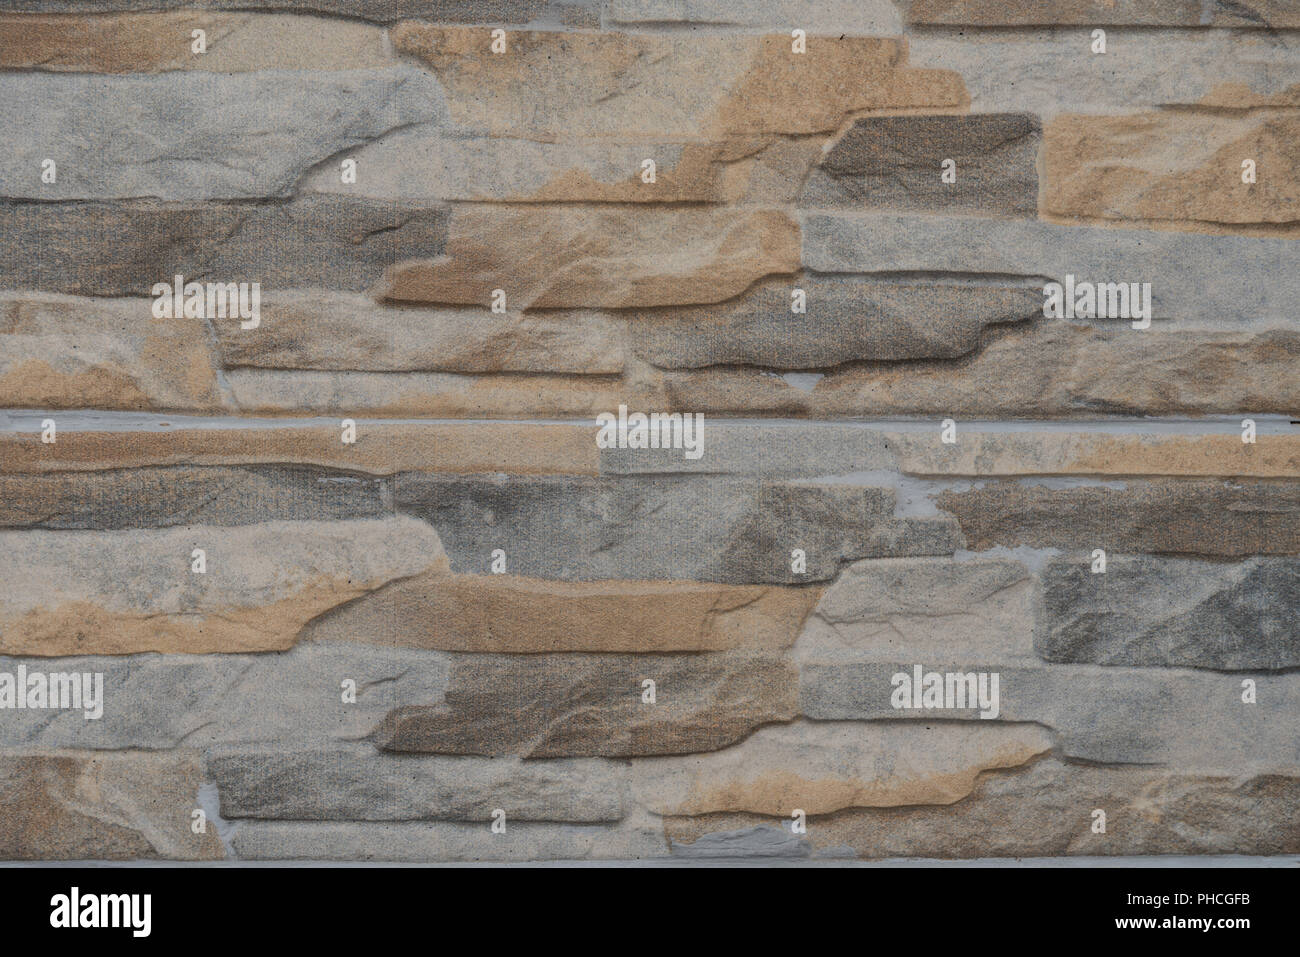 Stone wall with relatively smooth surface and colorful stones Stock Photo